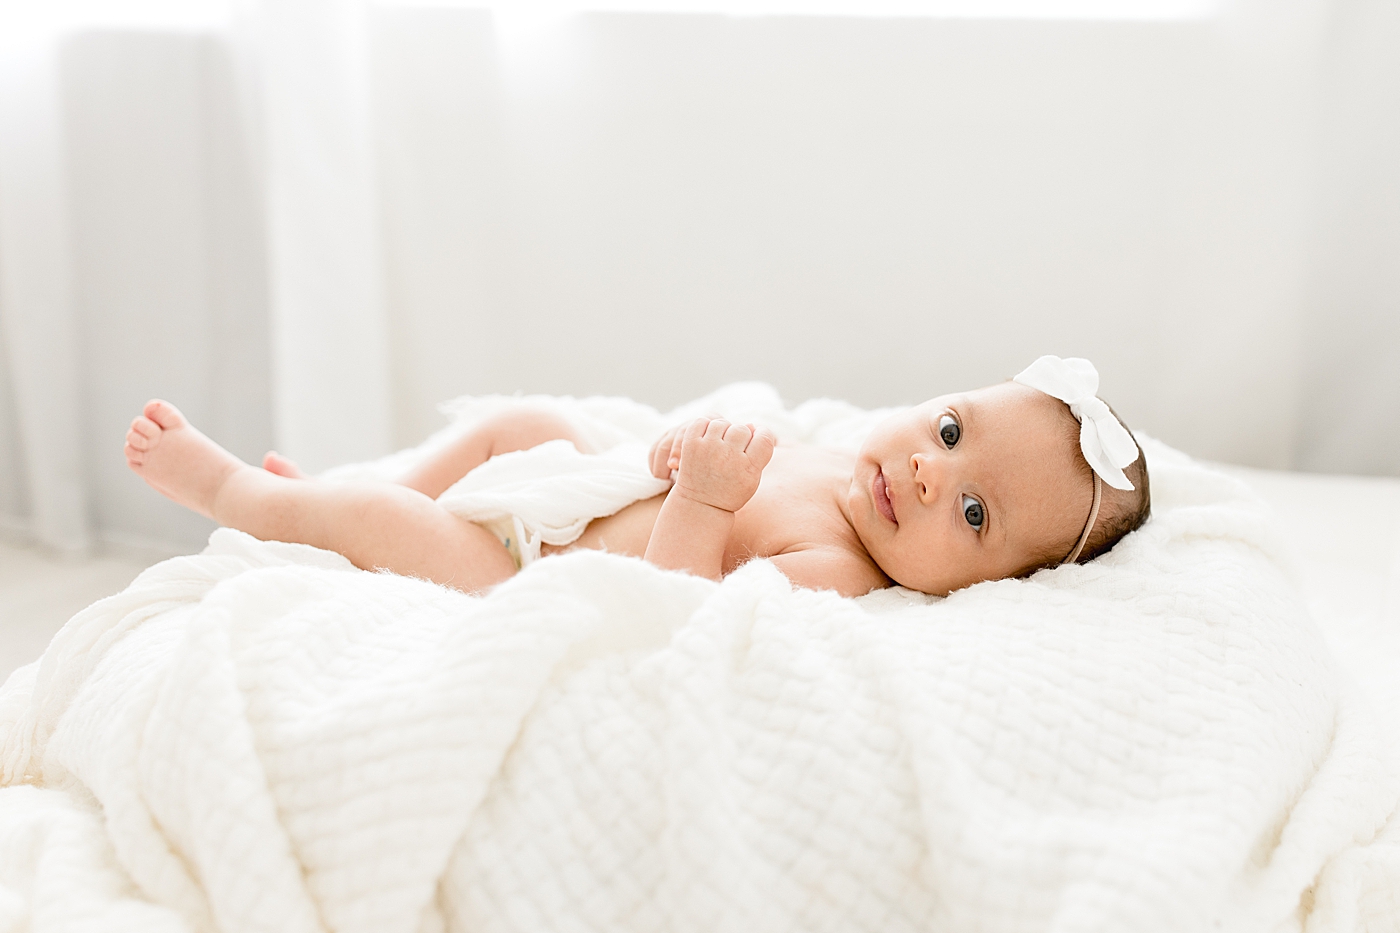 Newborn portraits in studio in Tampa. Photo by Brittany Elise Photography.